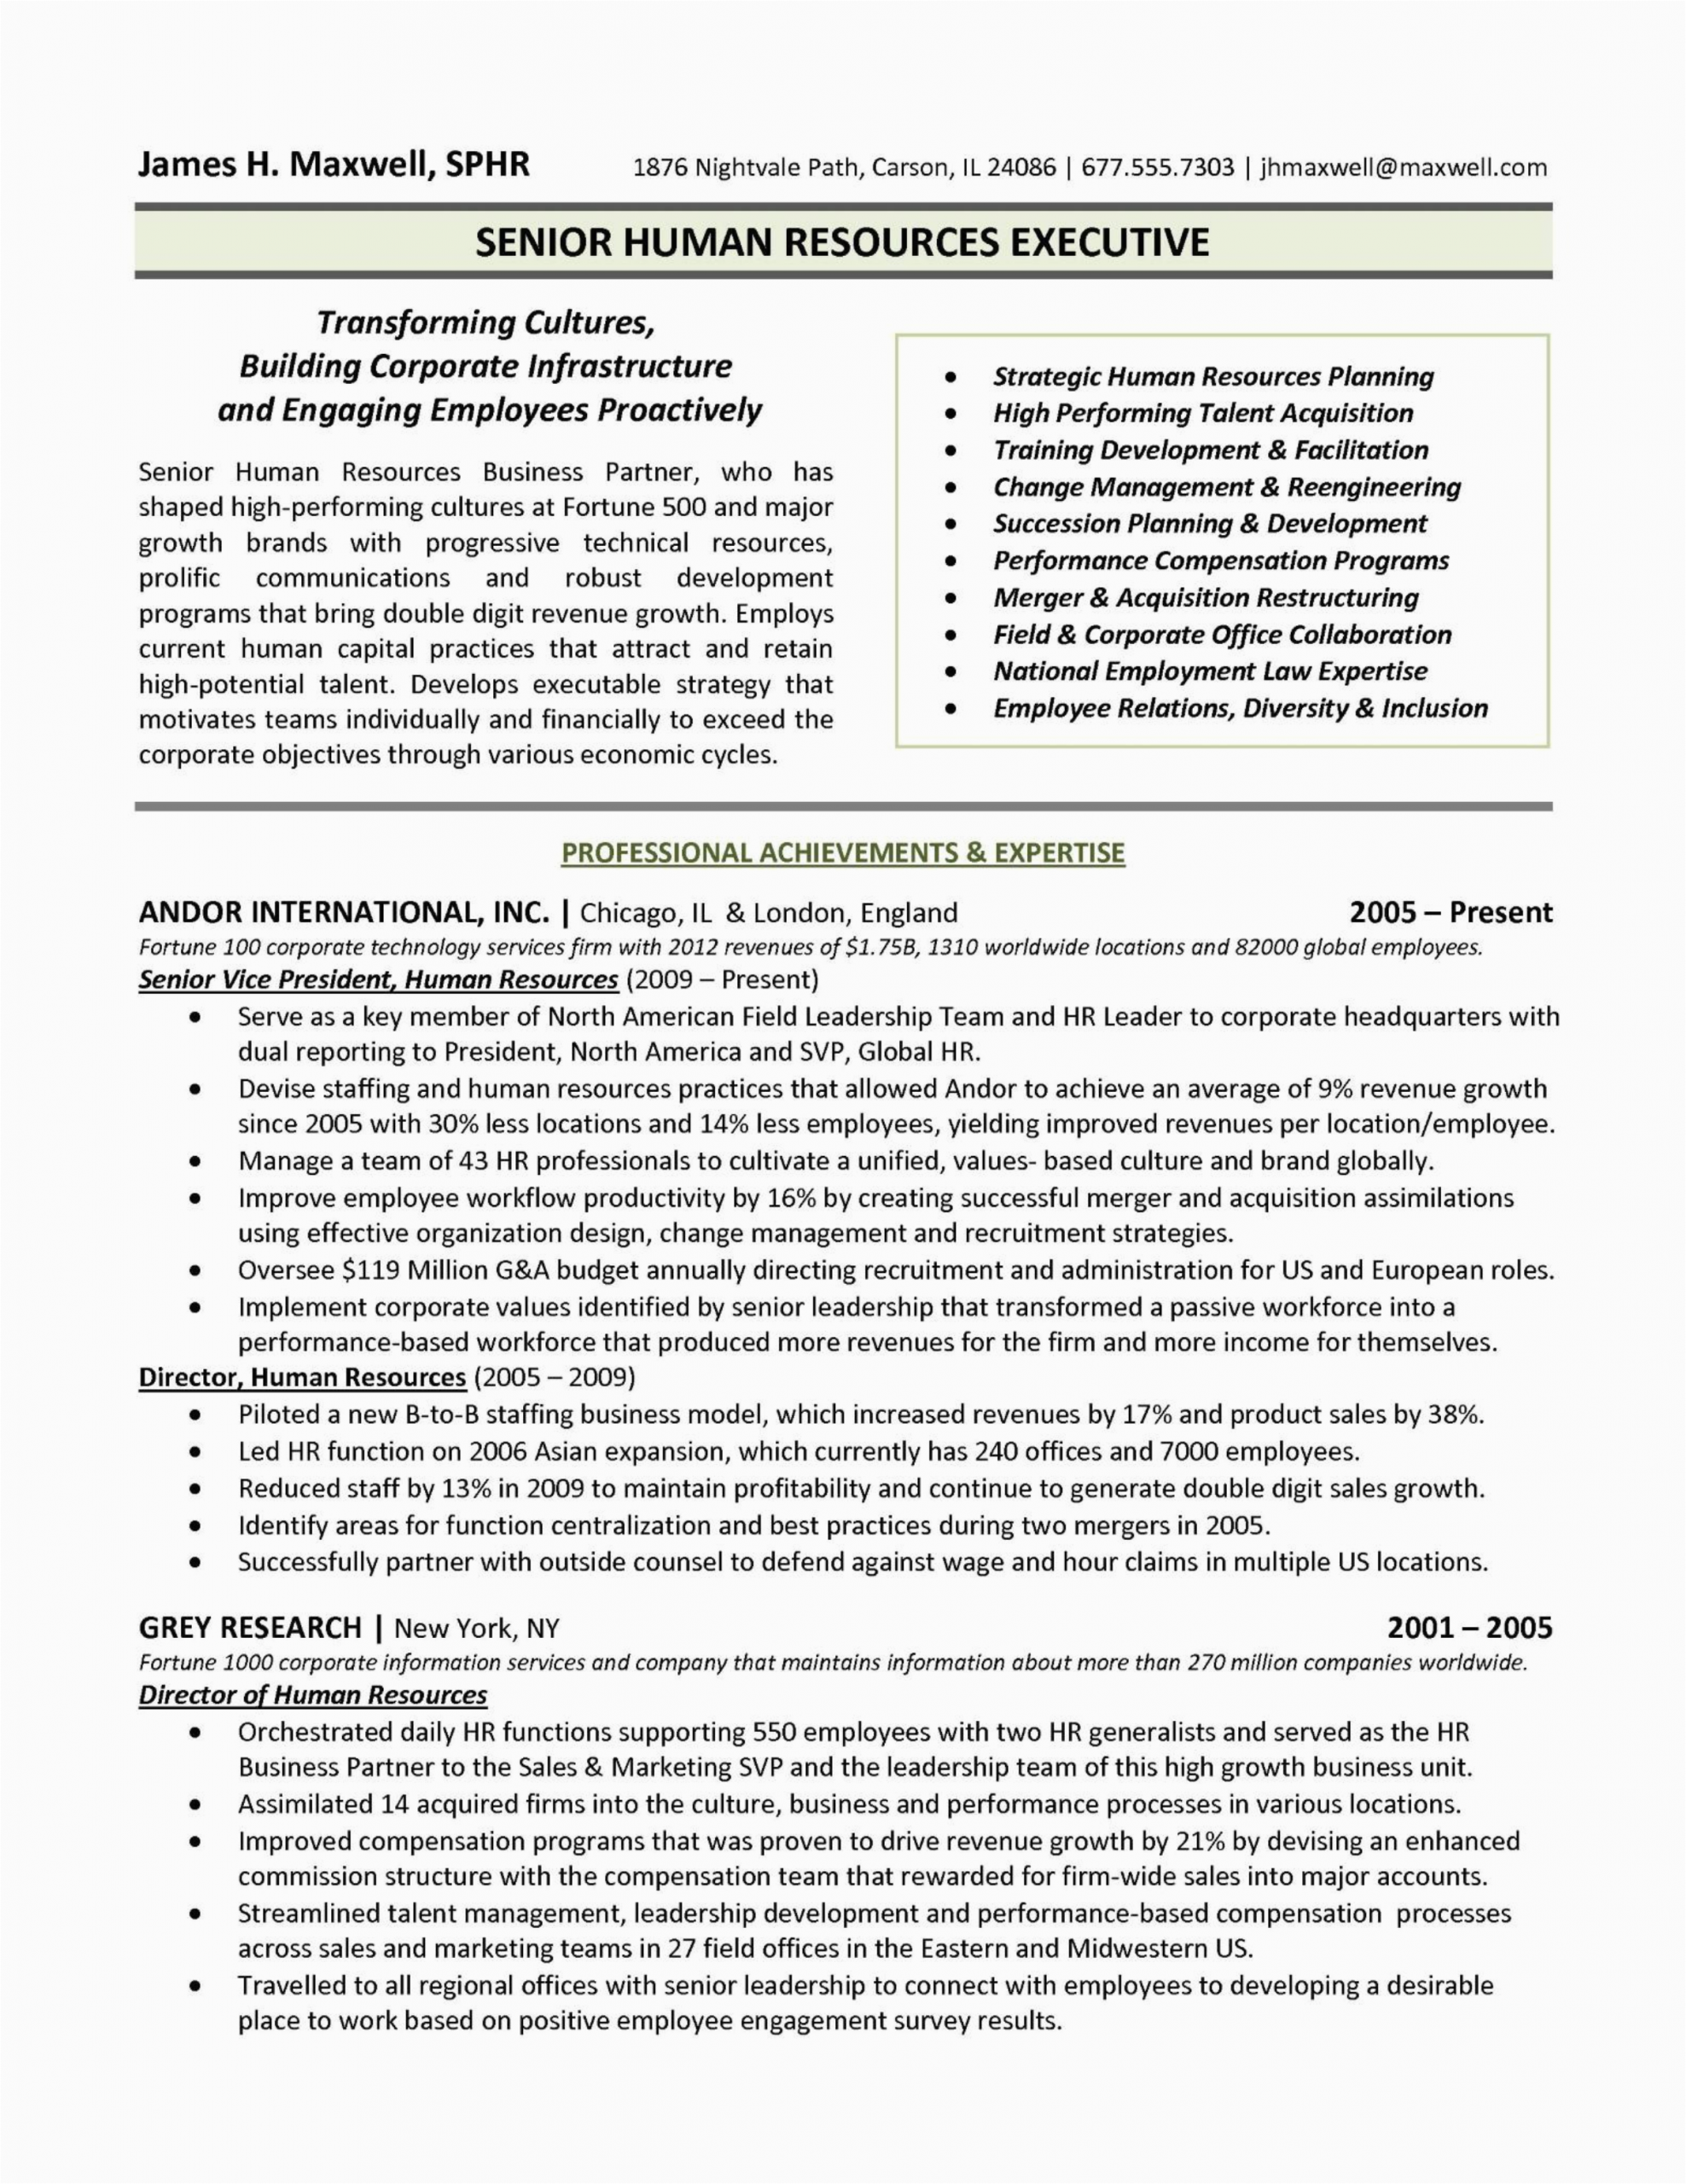 Human Resource Resume Examples and Samples Human Resources Executive Resume Sample Free Download